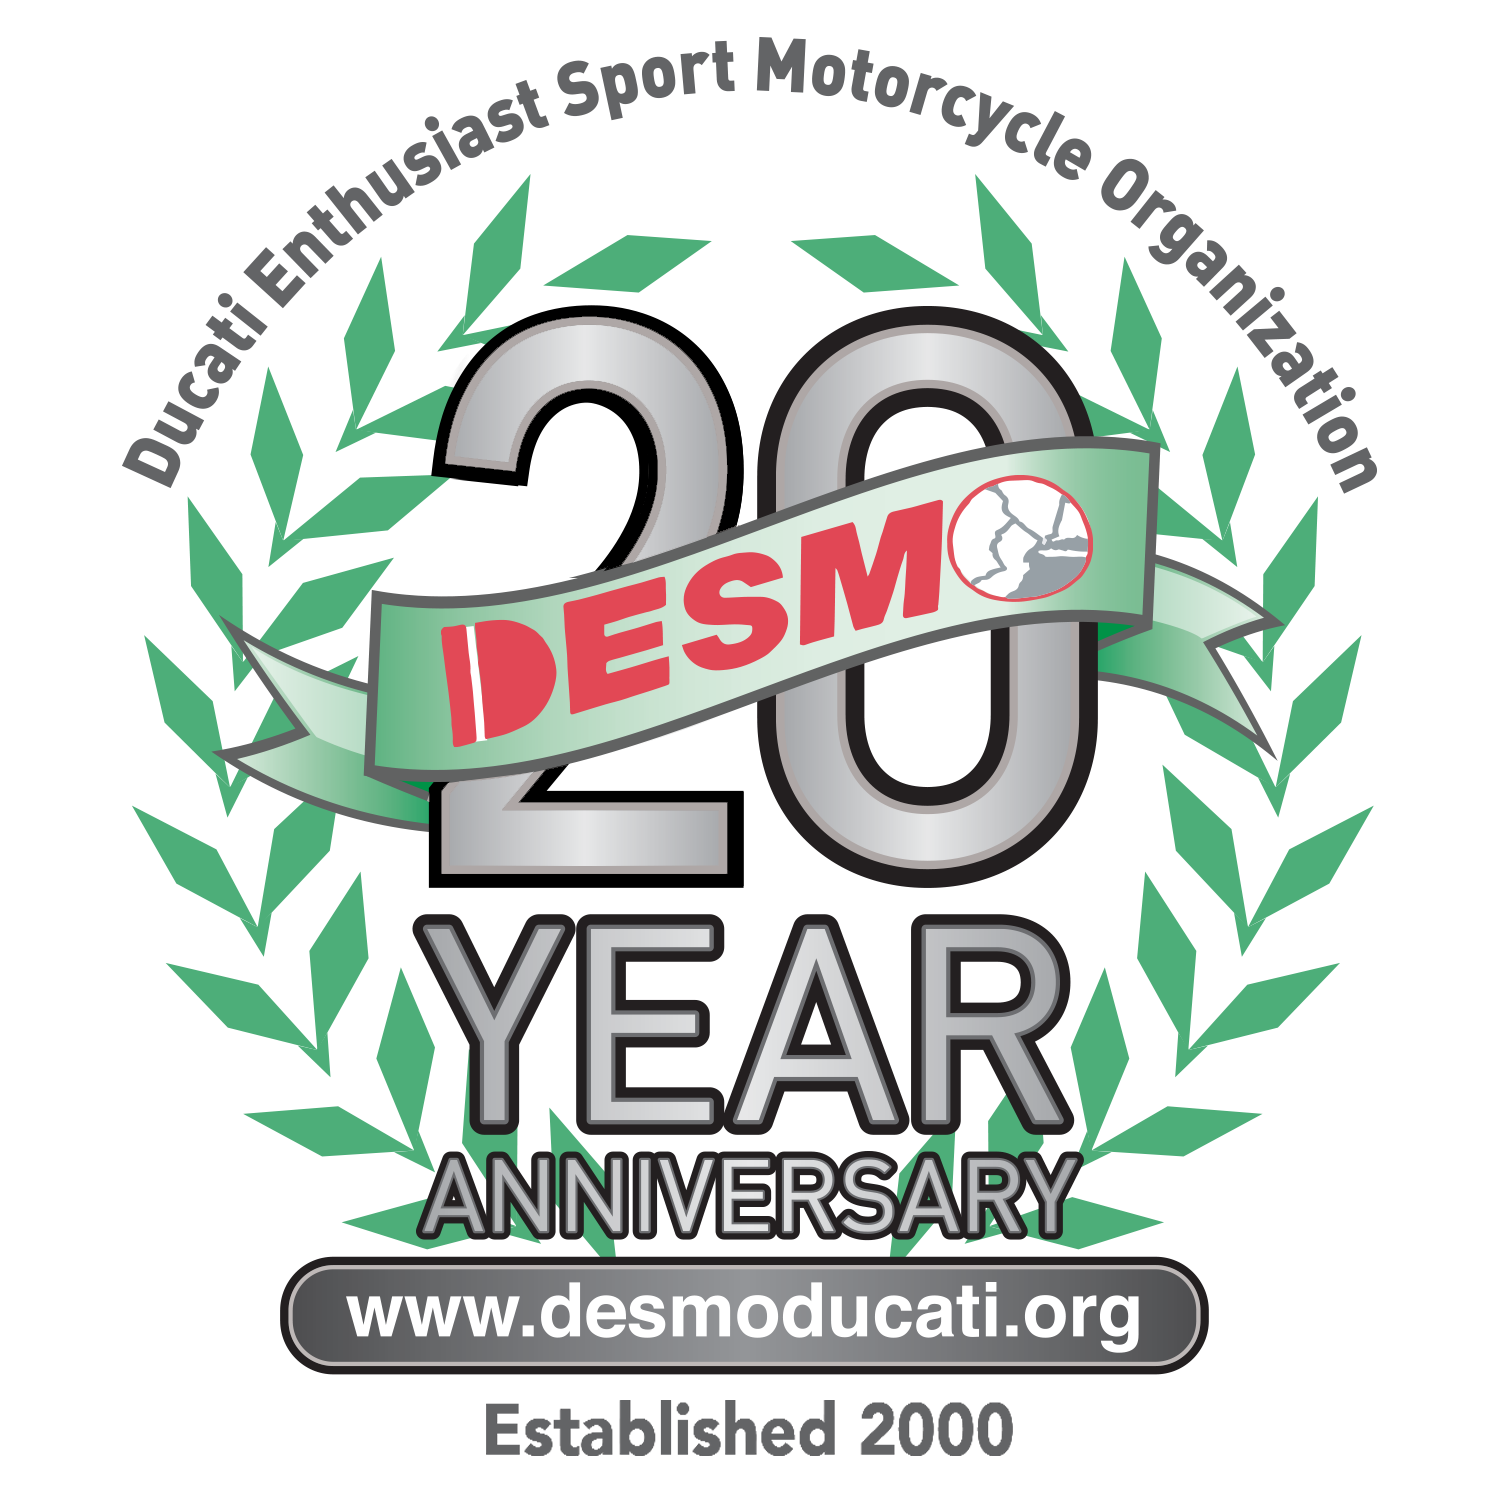 DESMO celebrated 15 years in 2015